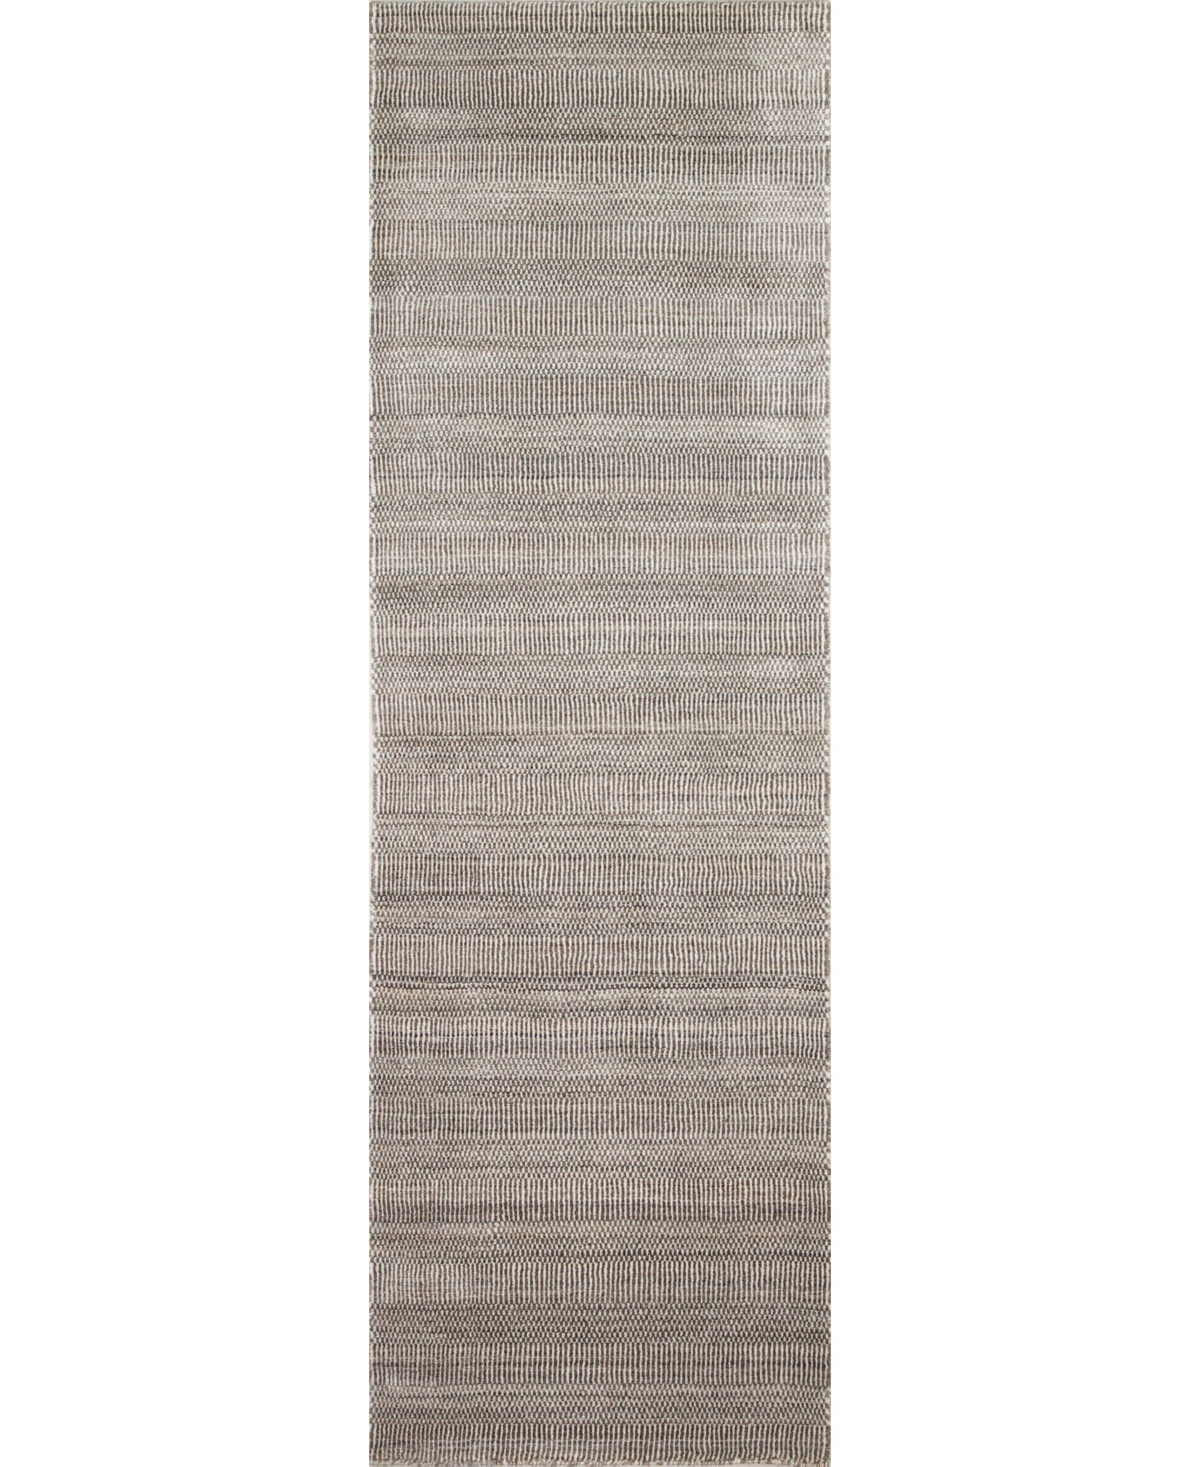 Closeout! Bb Rugs Forge M144 2'6in x 8' Runner Rug - Cinnamon